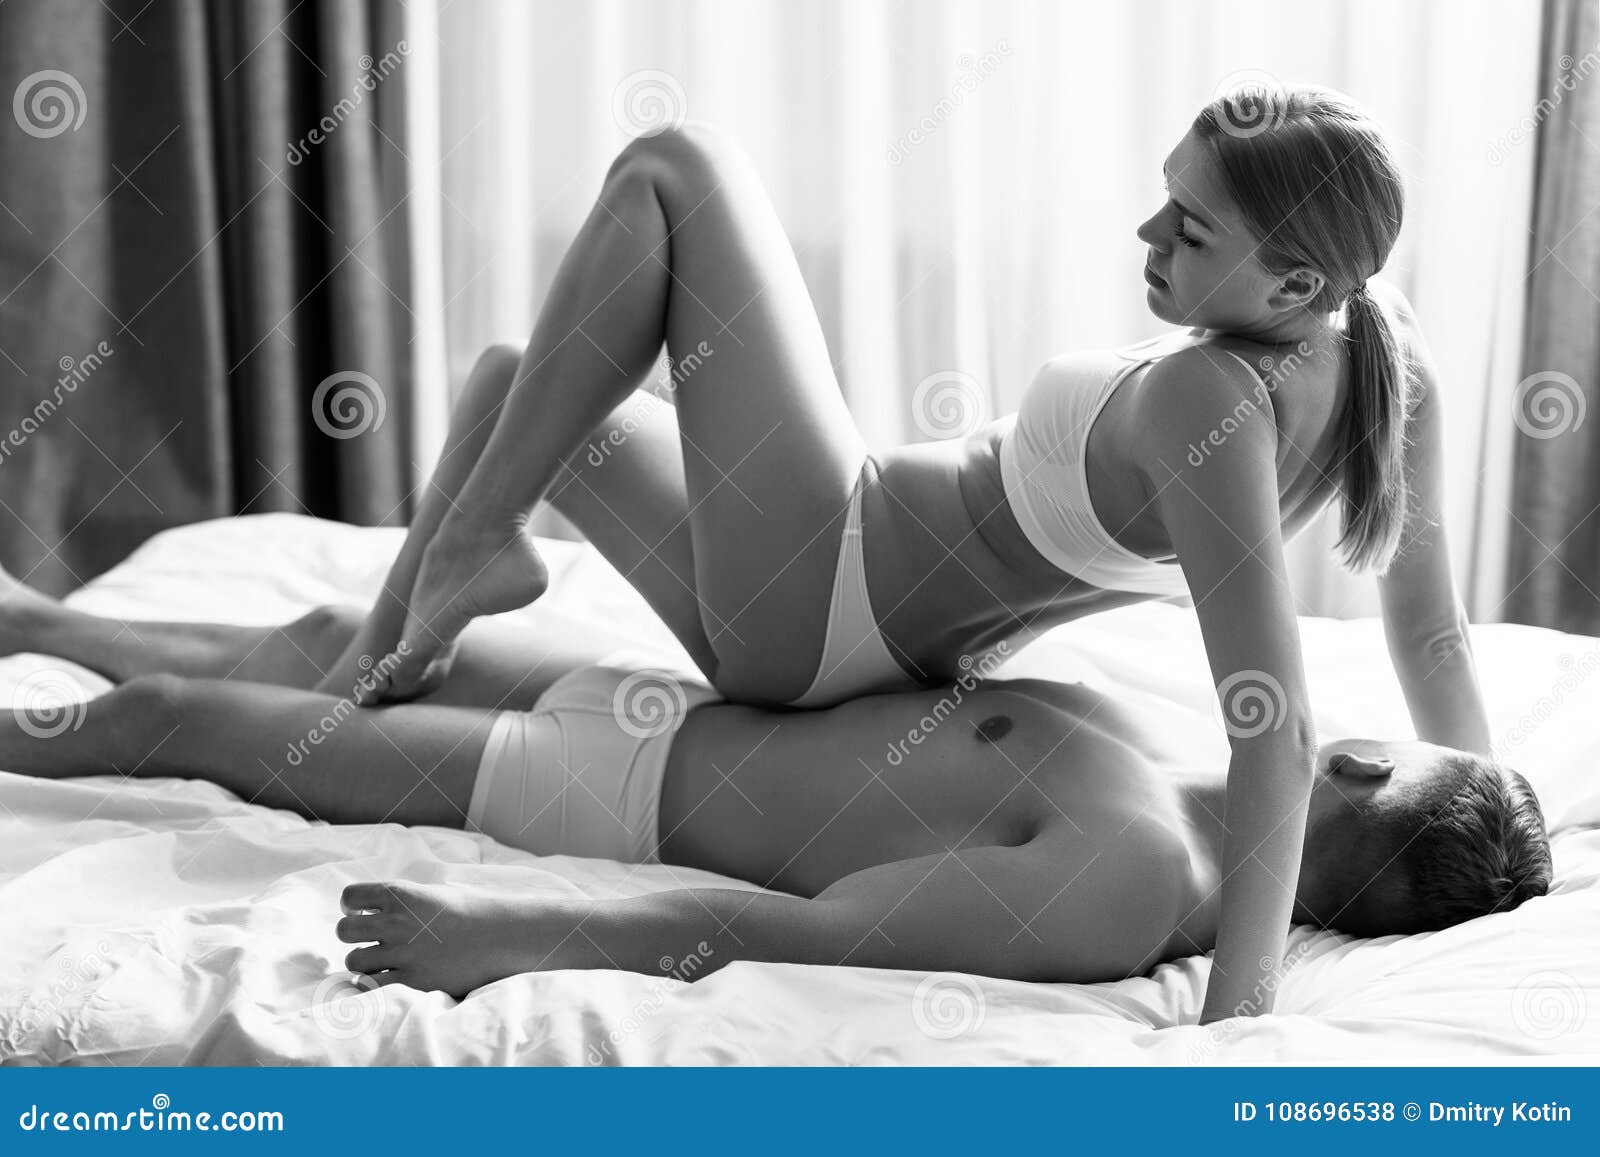 Couple Doing Erotic Massage in Bedroom. Stock Photo - Image of athletic,  foreplay: 108696538